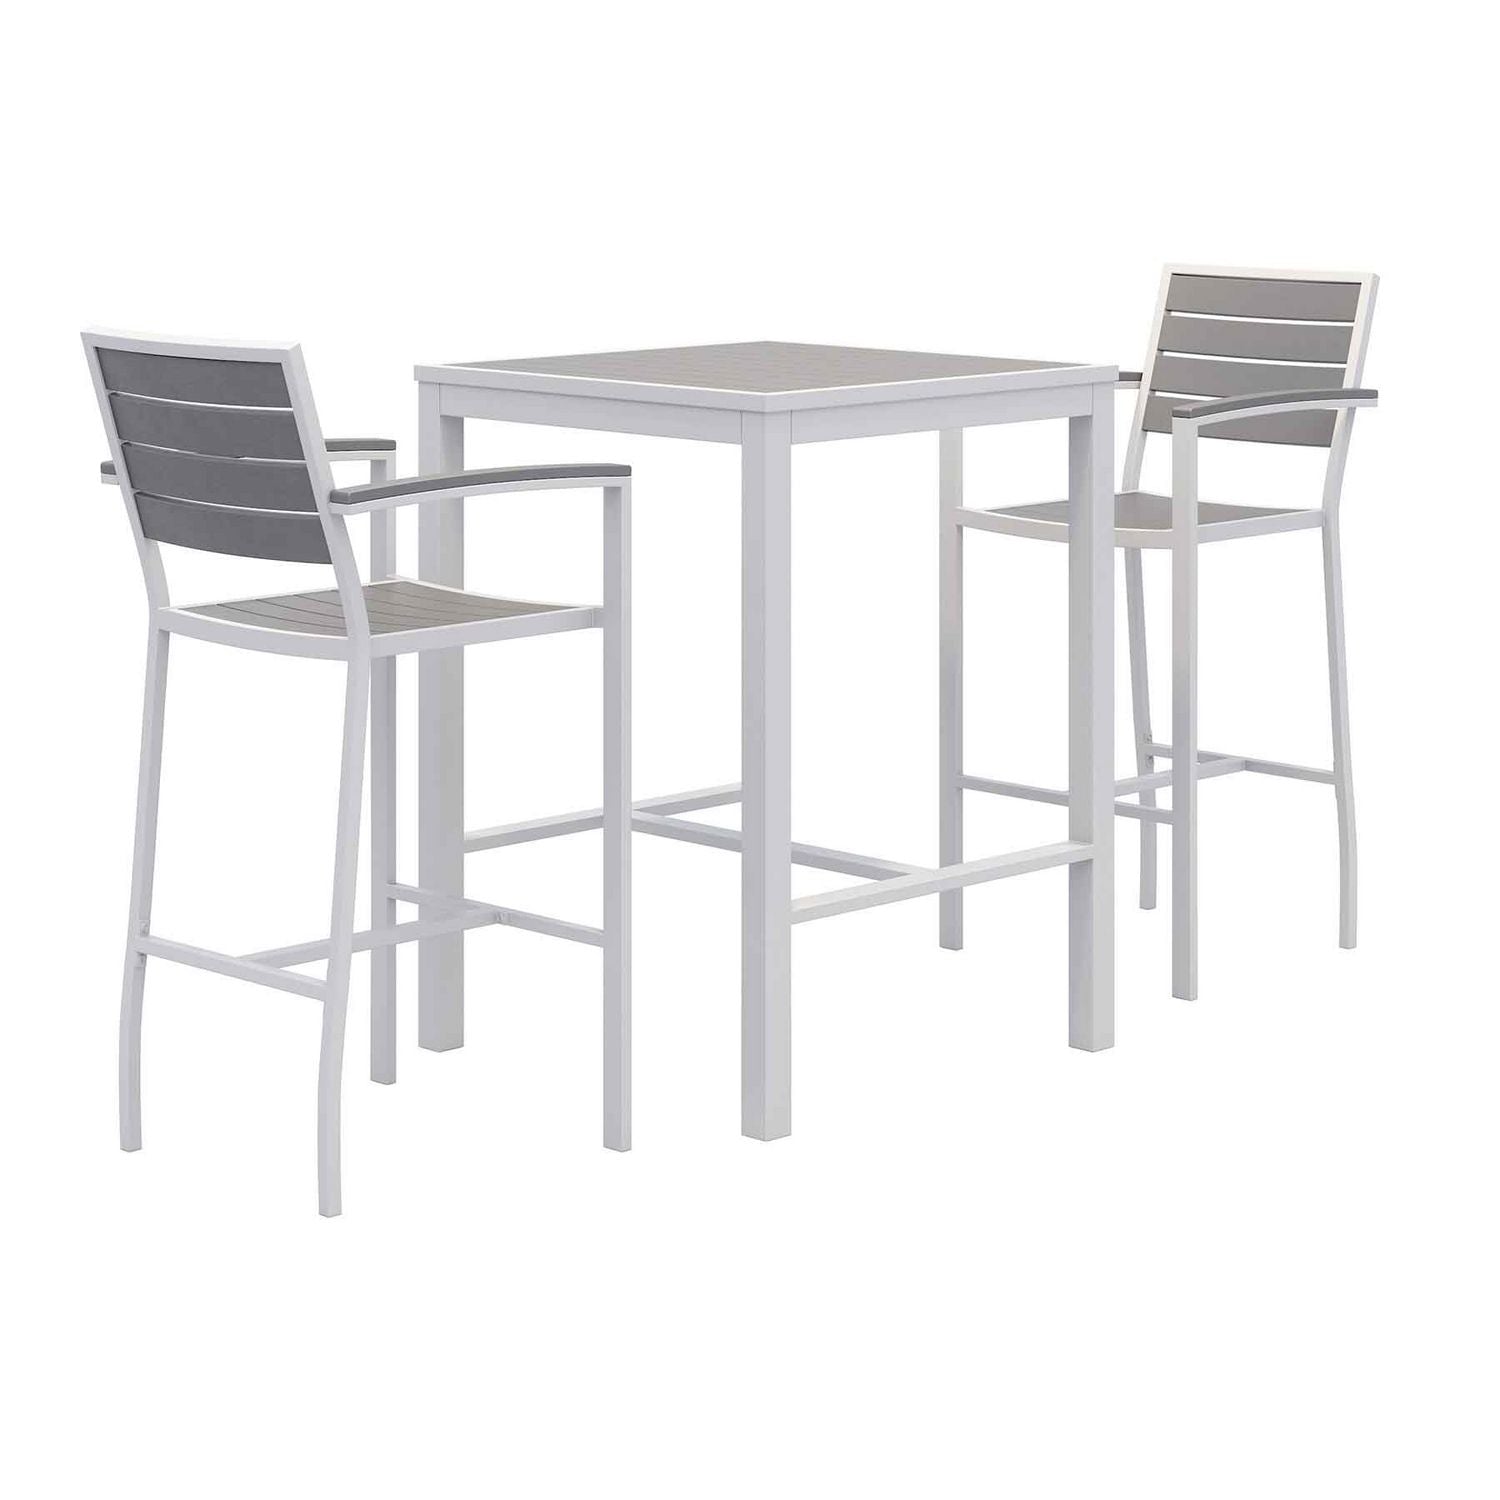 eveleen-outdoor-bistro-patio-table-with-two-gray-powder-coated-polymer-barstools-30-square-gray-ships-in-4-6-bus-days_kfi840031925268 - 1